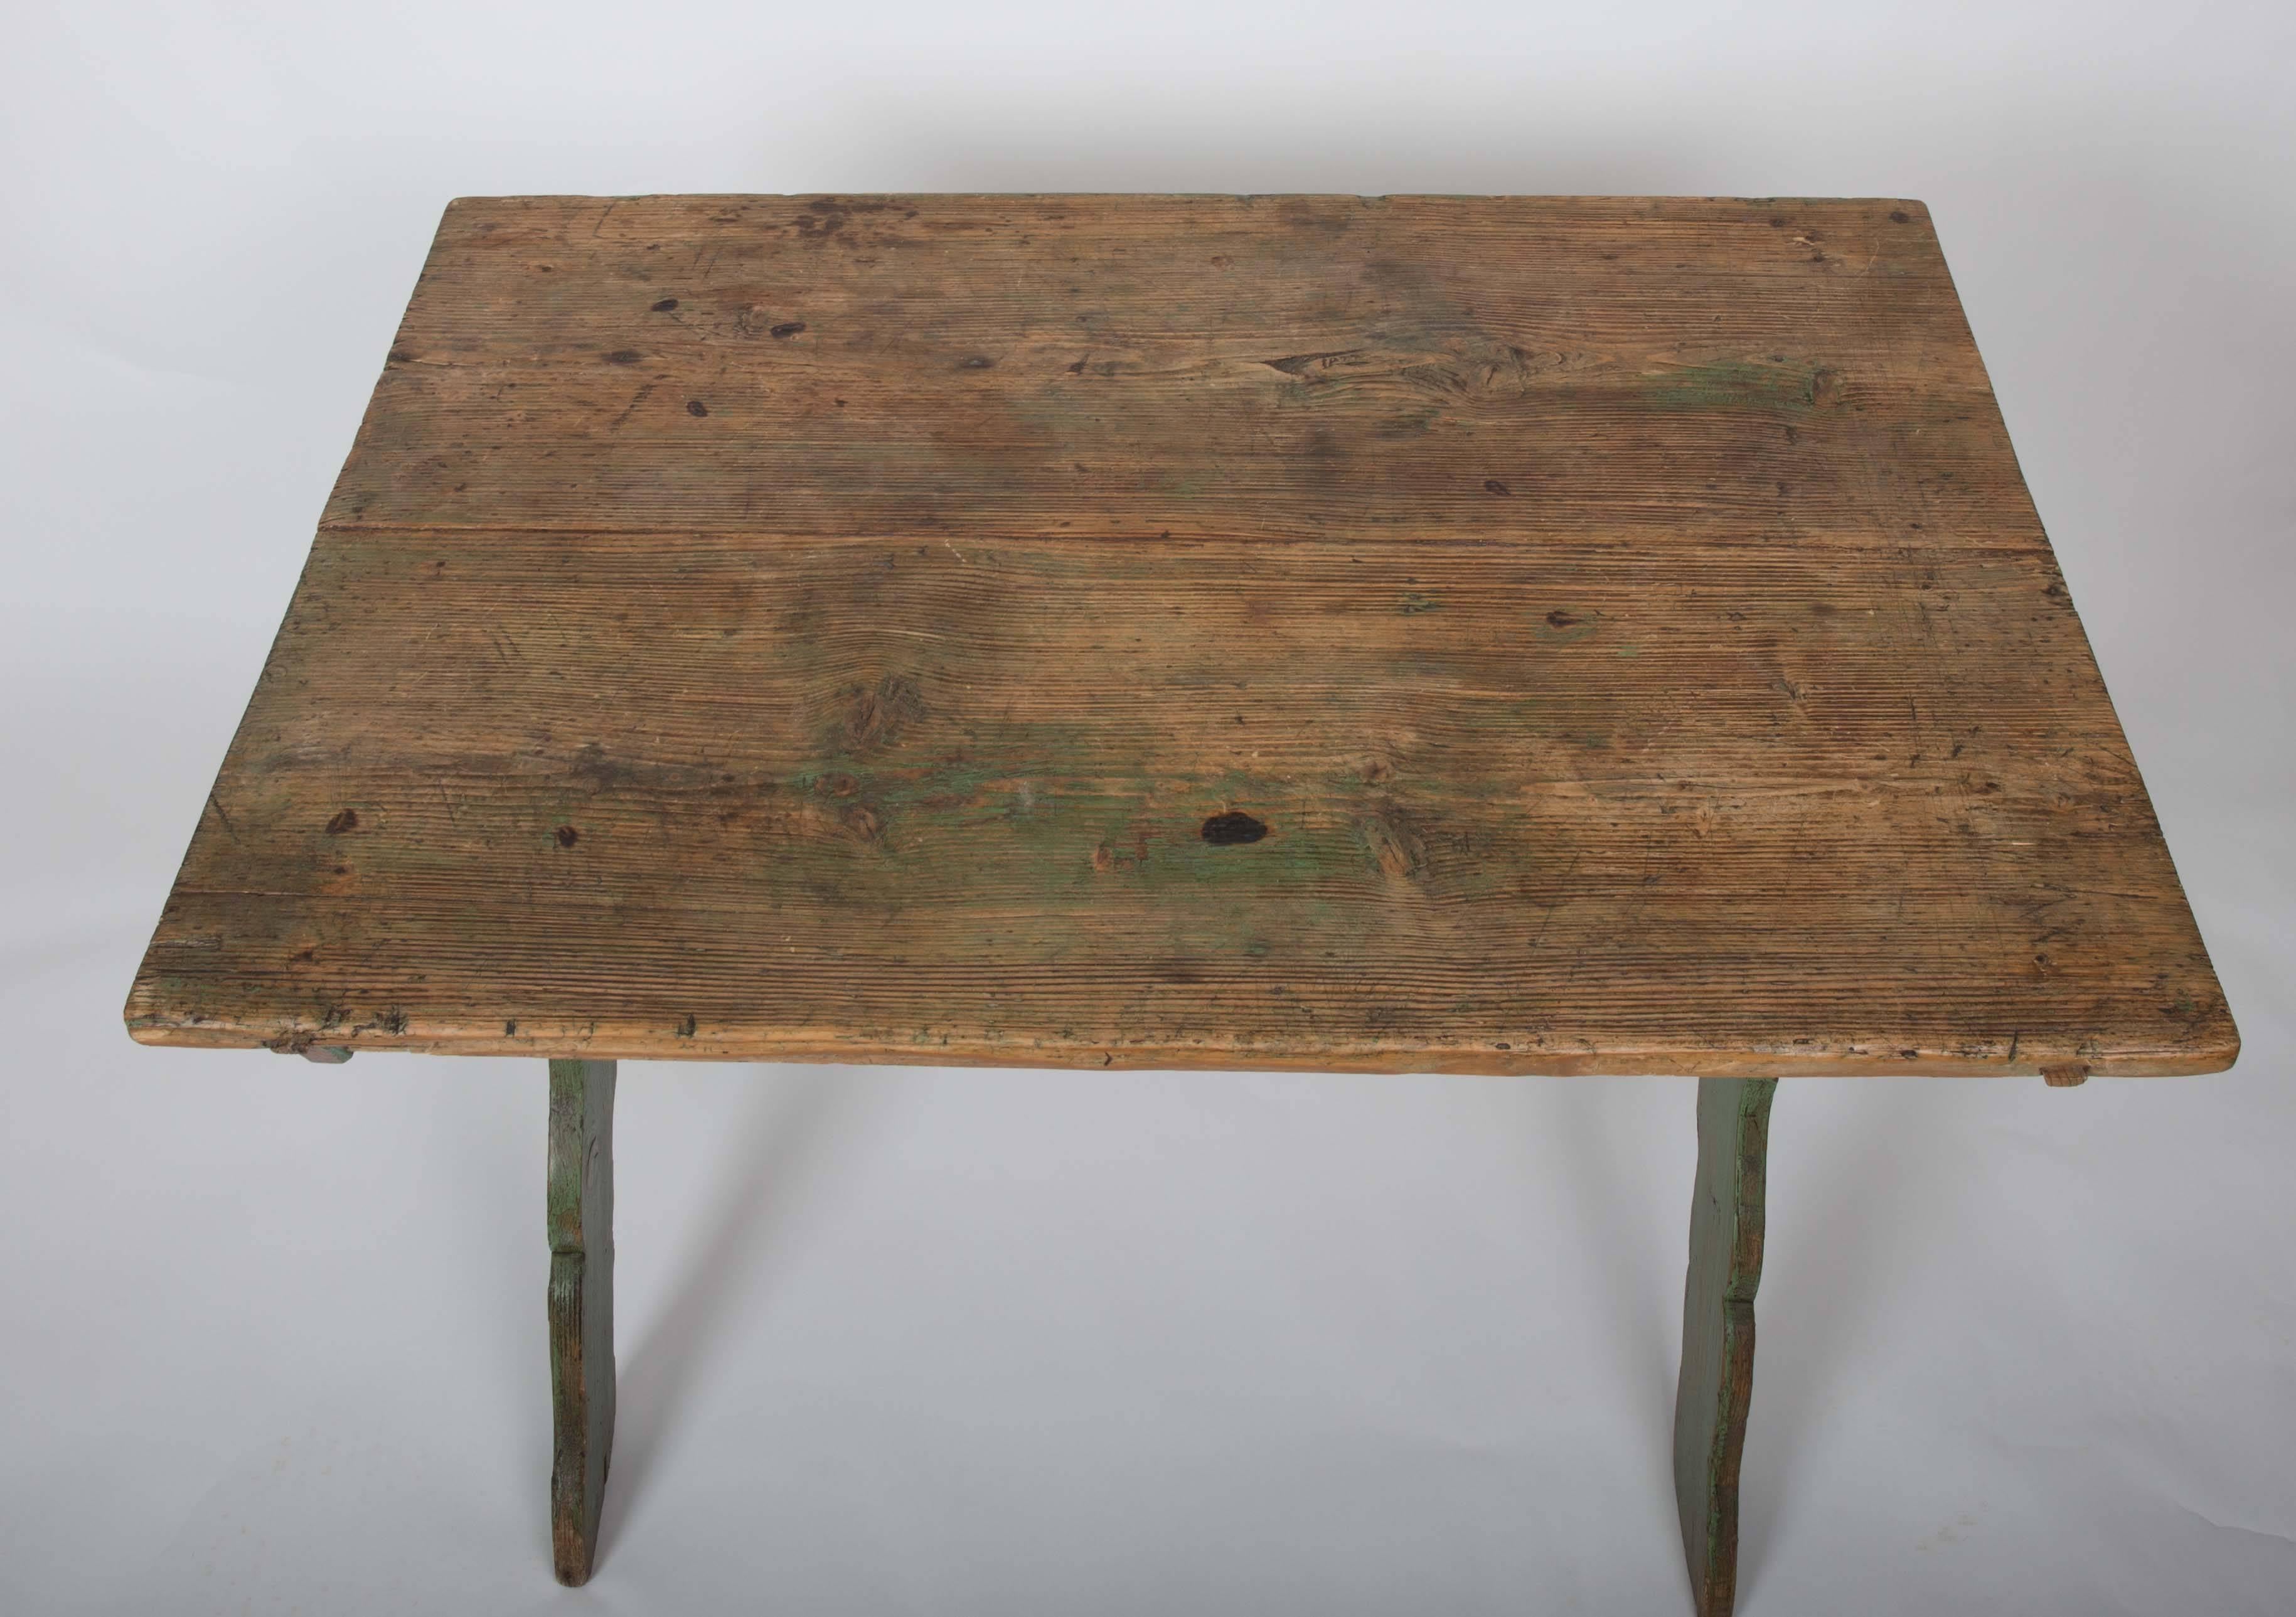 Rustic Farm Table with Painted Wood Base 1